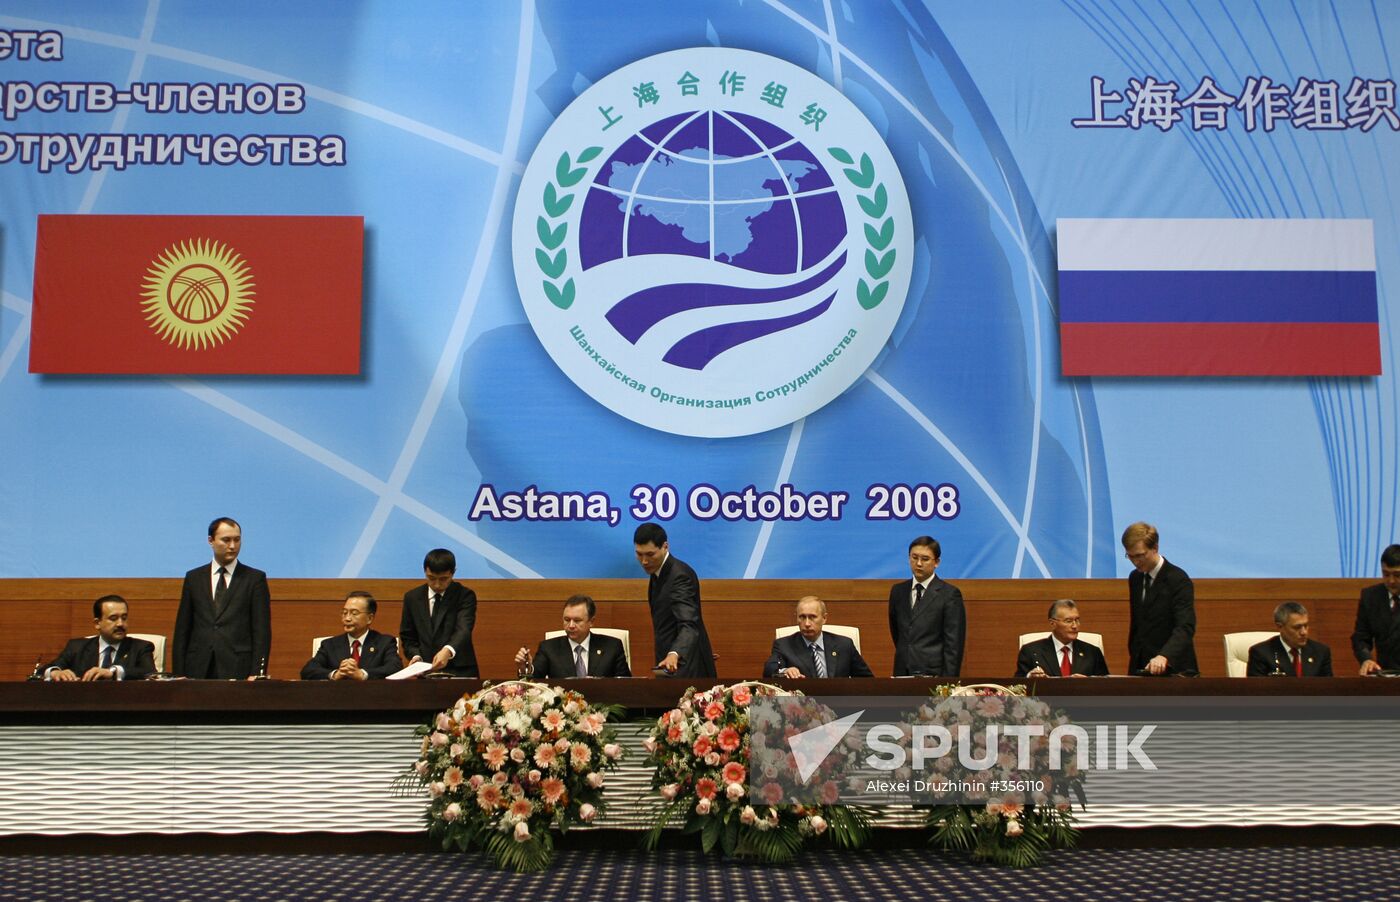 Shanghai Cooperation Organization prime ministers' meeting